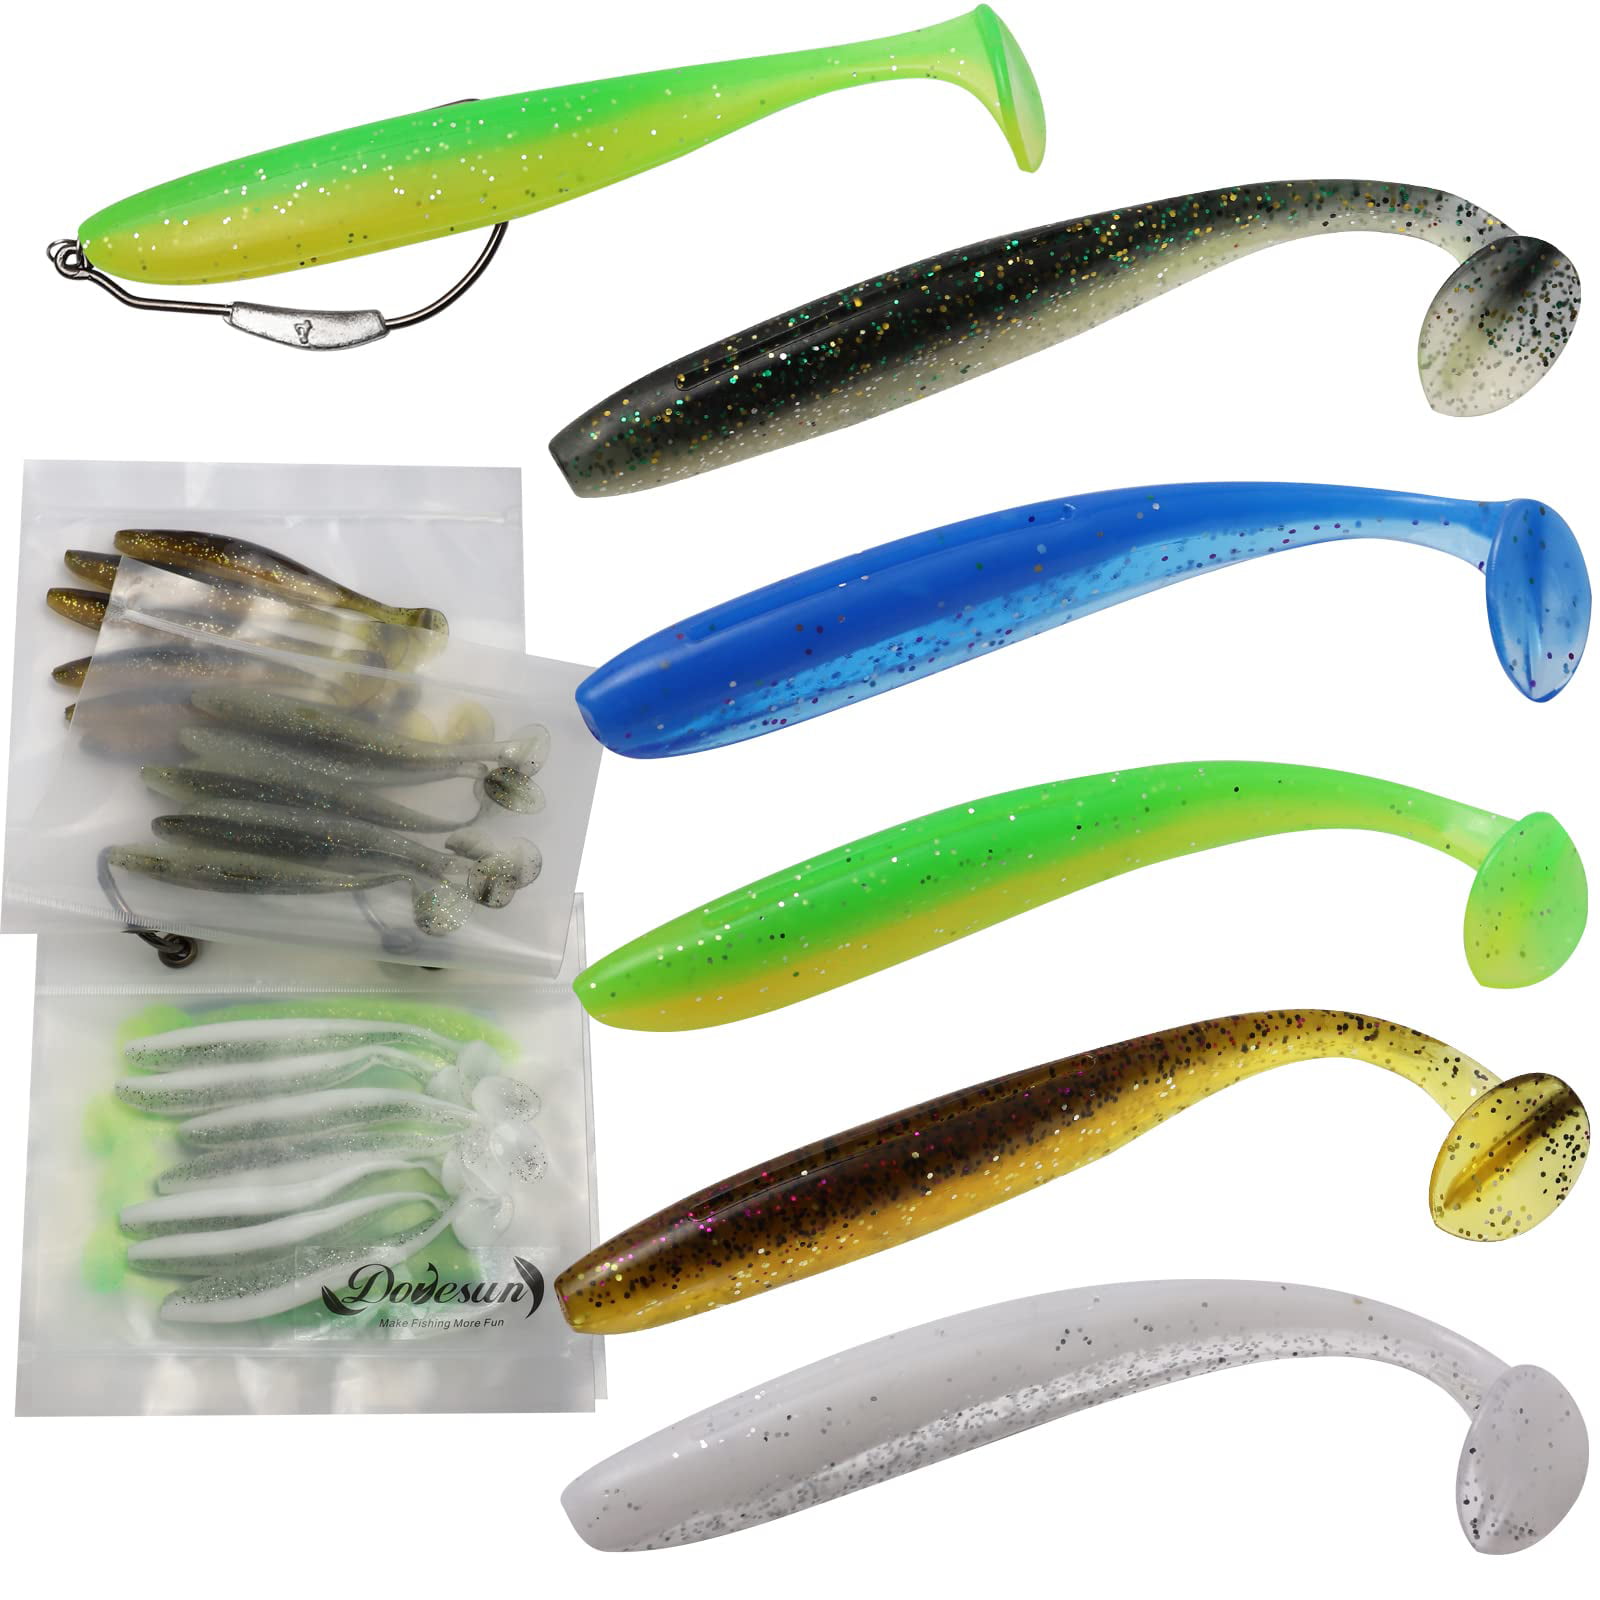 Paddle Tail Swimbait, Soft Plastic Swimbait Bass Fishing Lure 5 Colors Shad  Minnow Bait Used with Chatterbait-Jig Head Rig Soft Swimbaits 3.7in 4.7in  /40-50PCS 